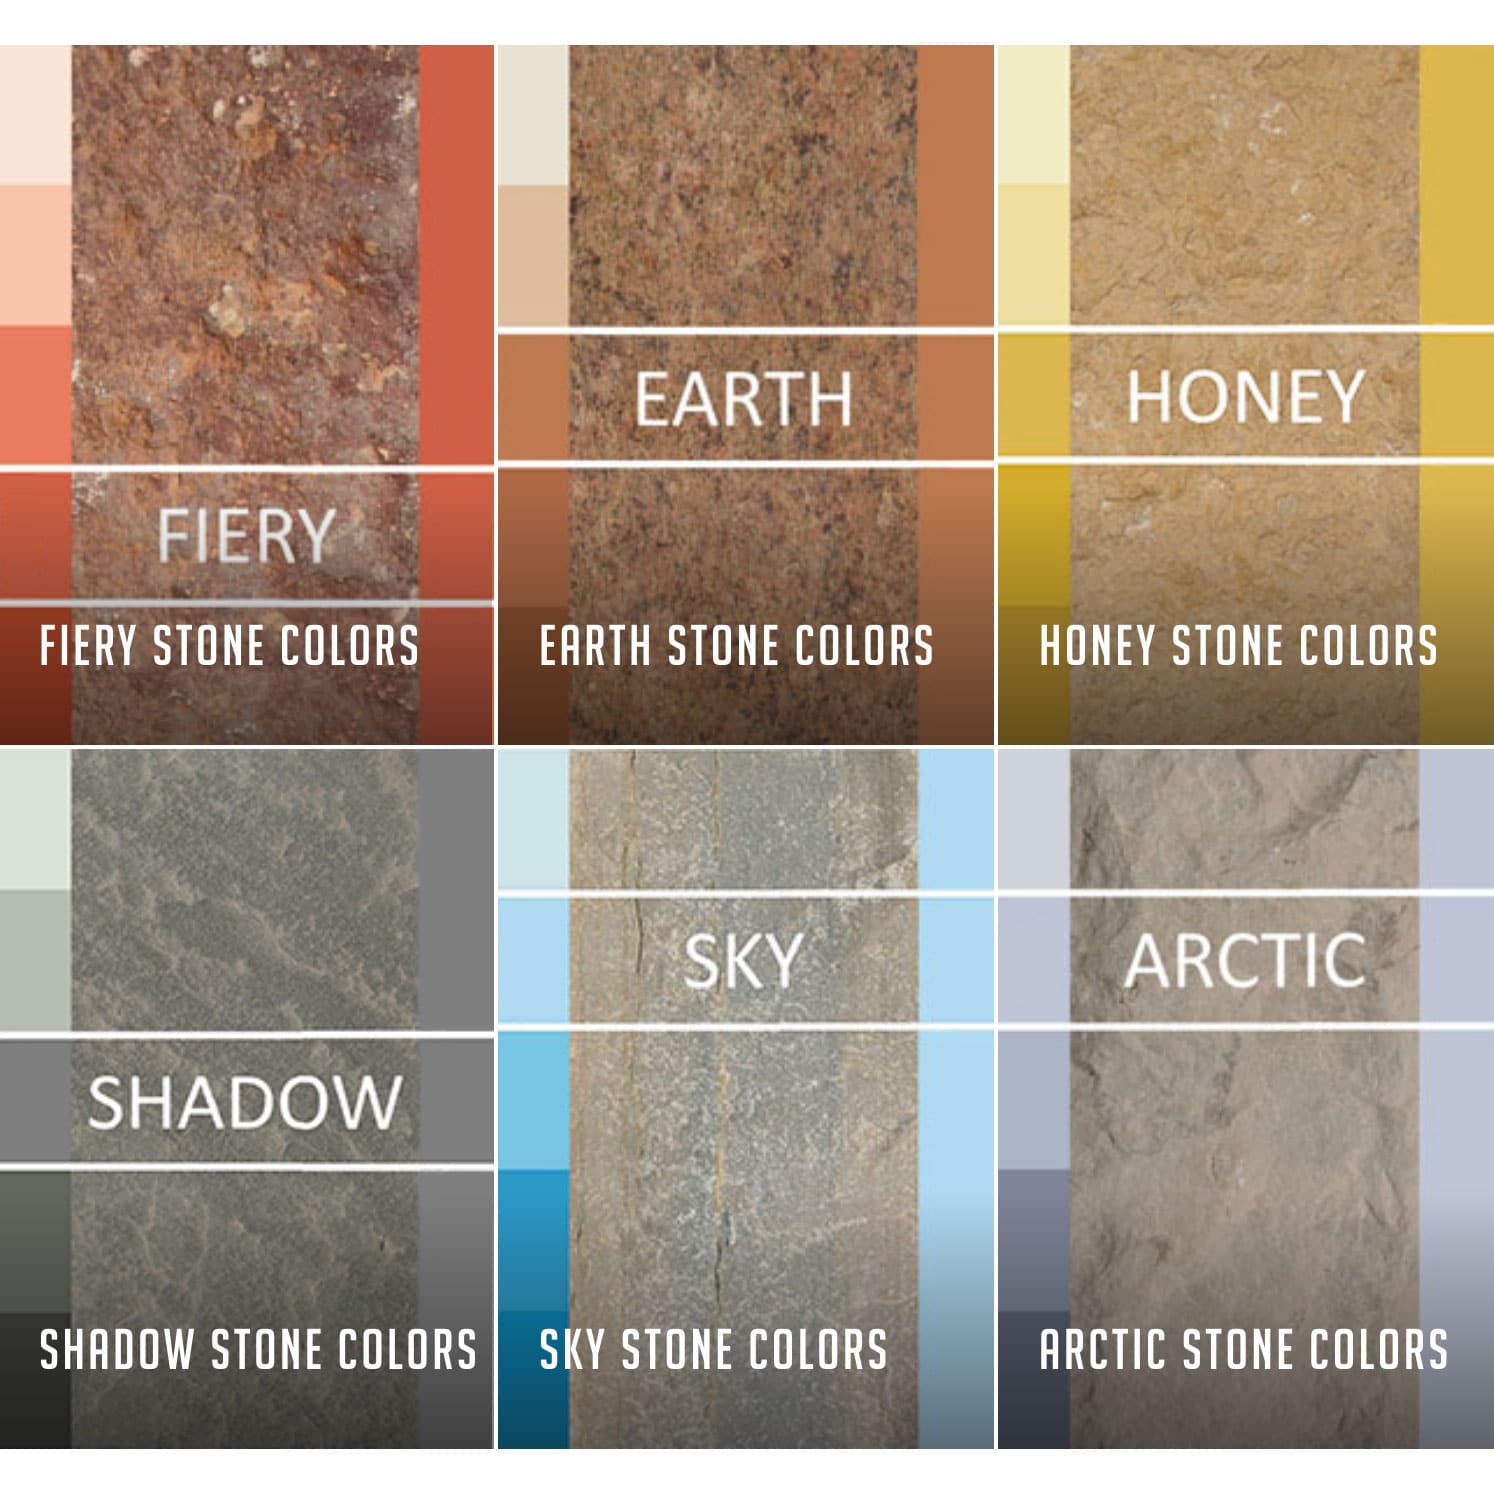 Design with Natural Stone Colors - Stone Veneers, Cut & Landscape Stone ...